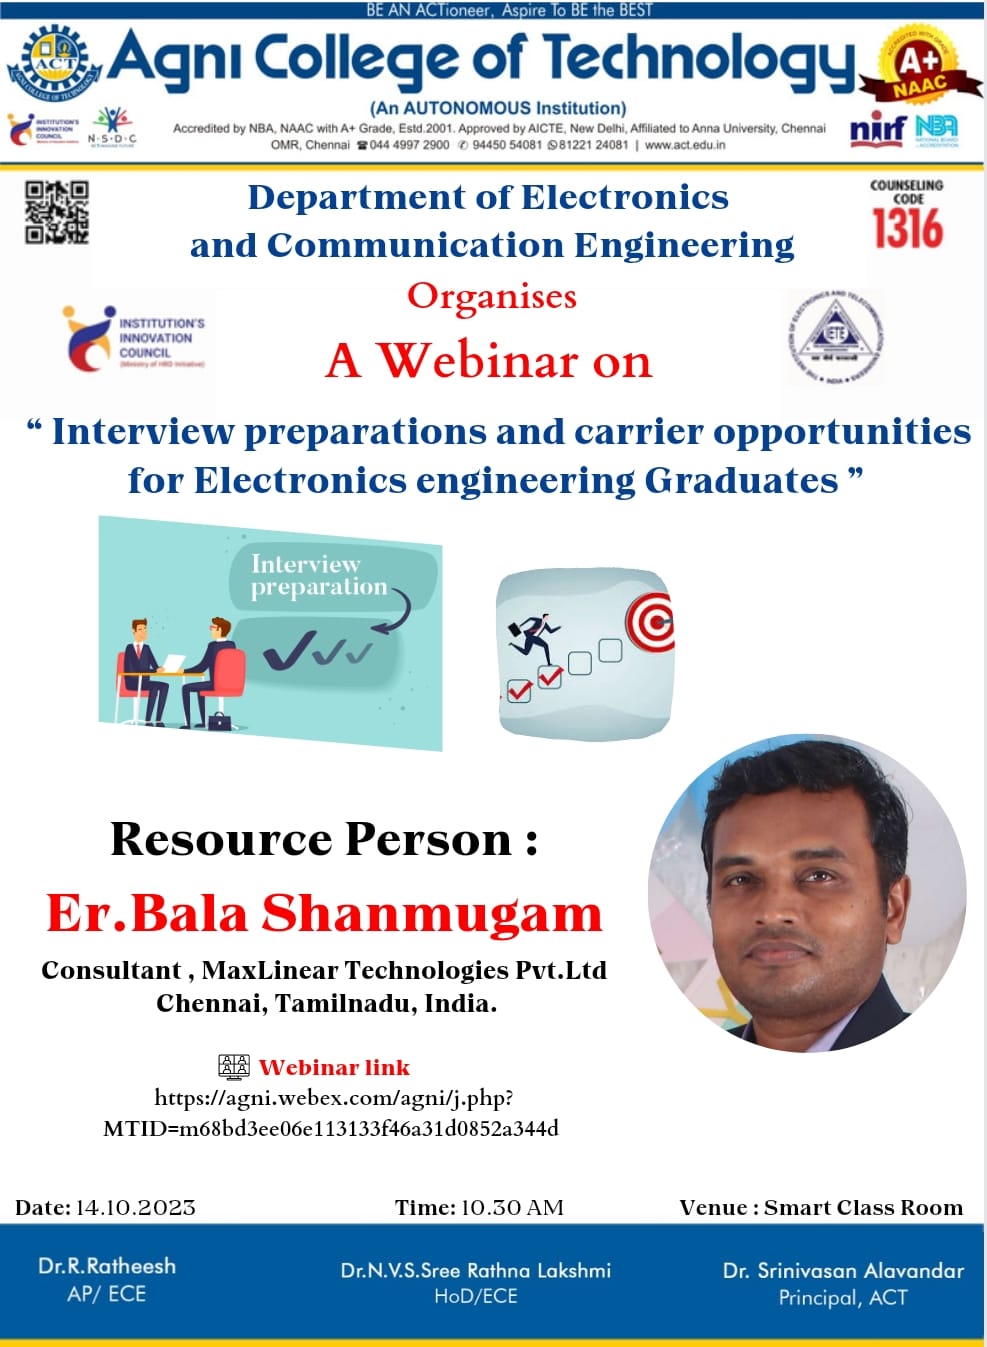 A Webinar on Interview preparations and Career opportunities for Electronics Engineering Graduates